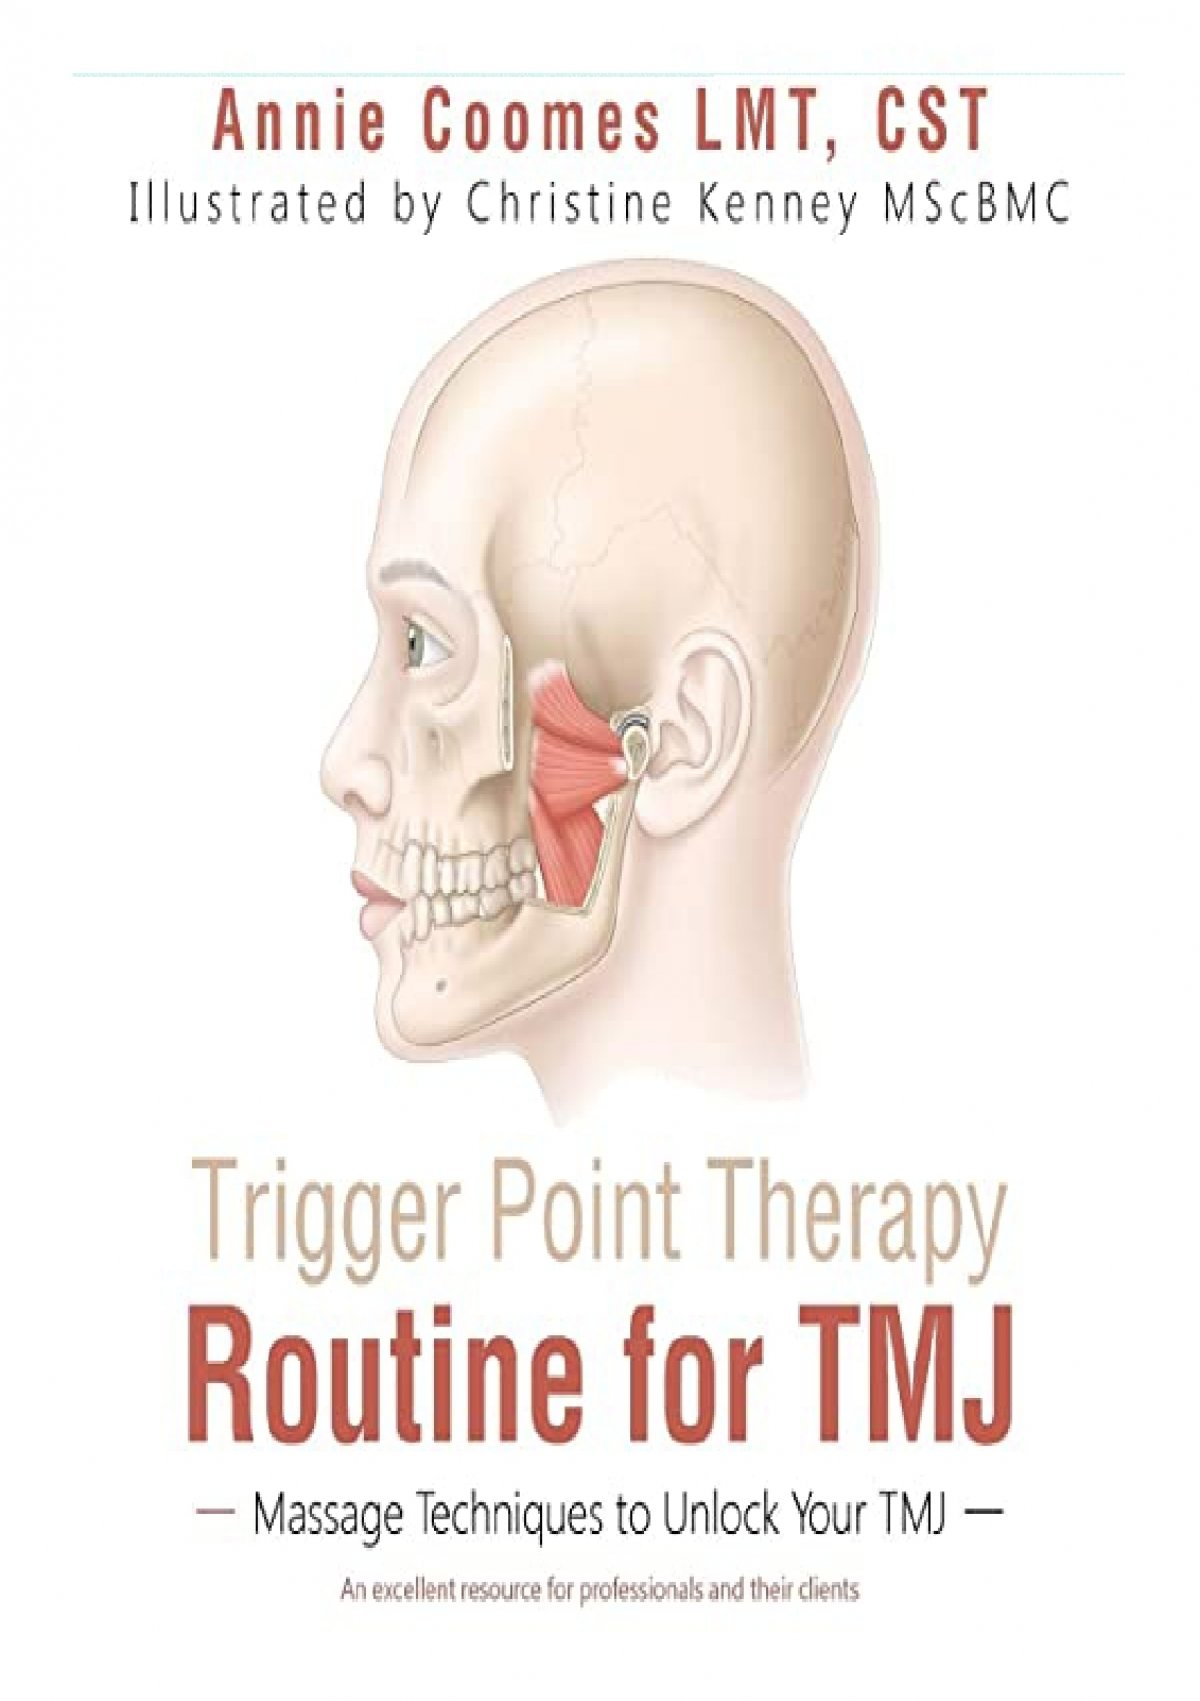 Read Book Trigger Point Therapy Routine For Tmj Massage Techniques To Unlock Your Tmj